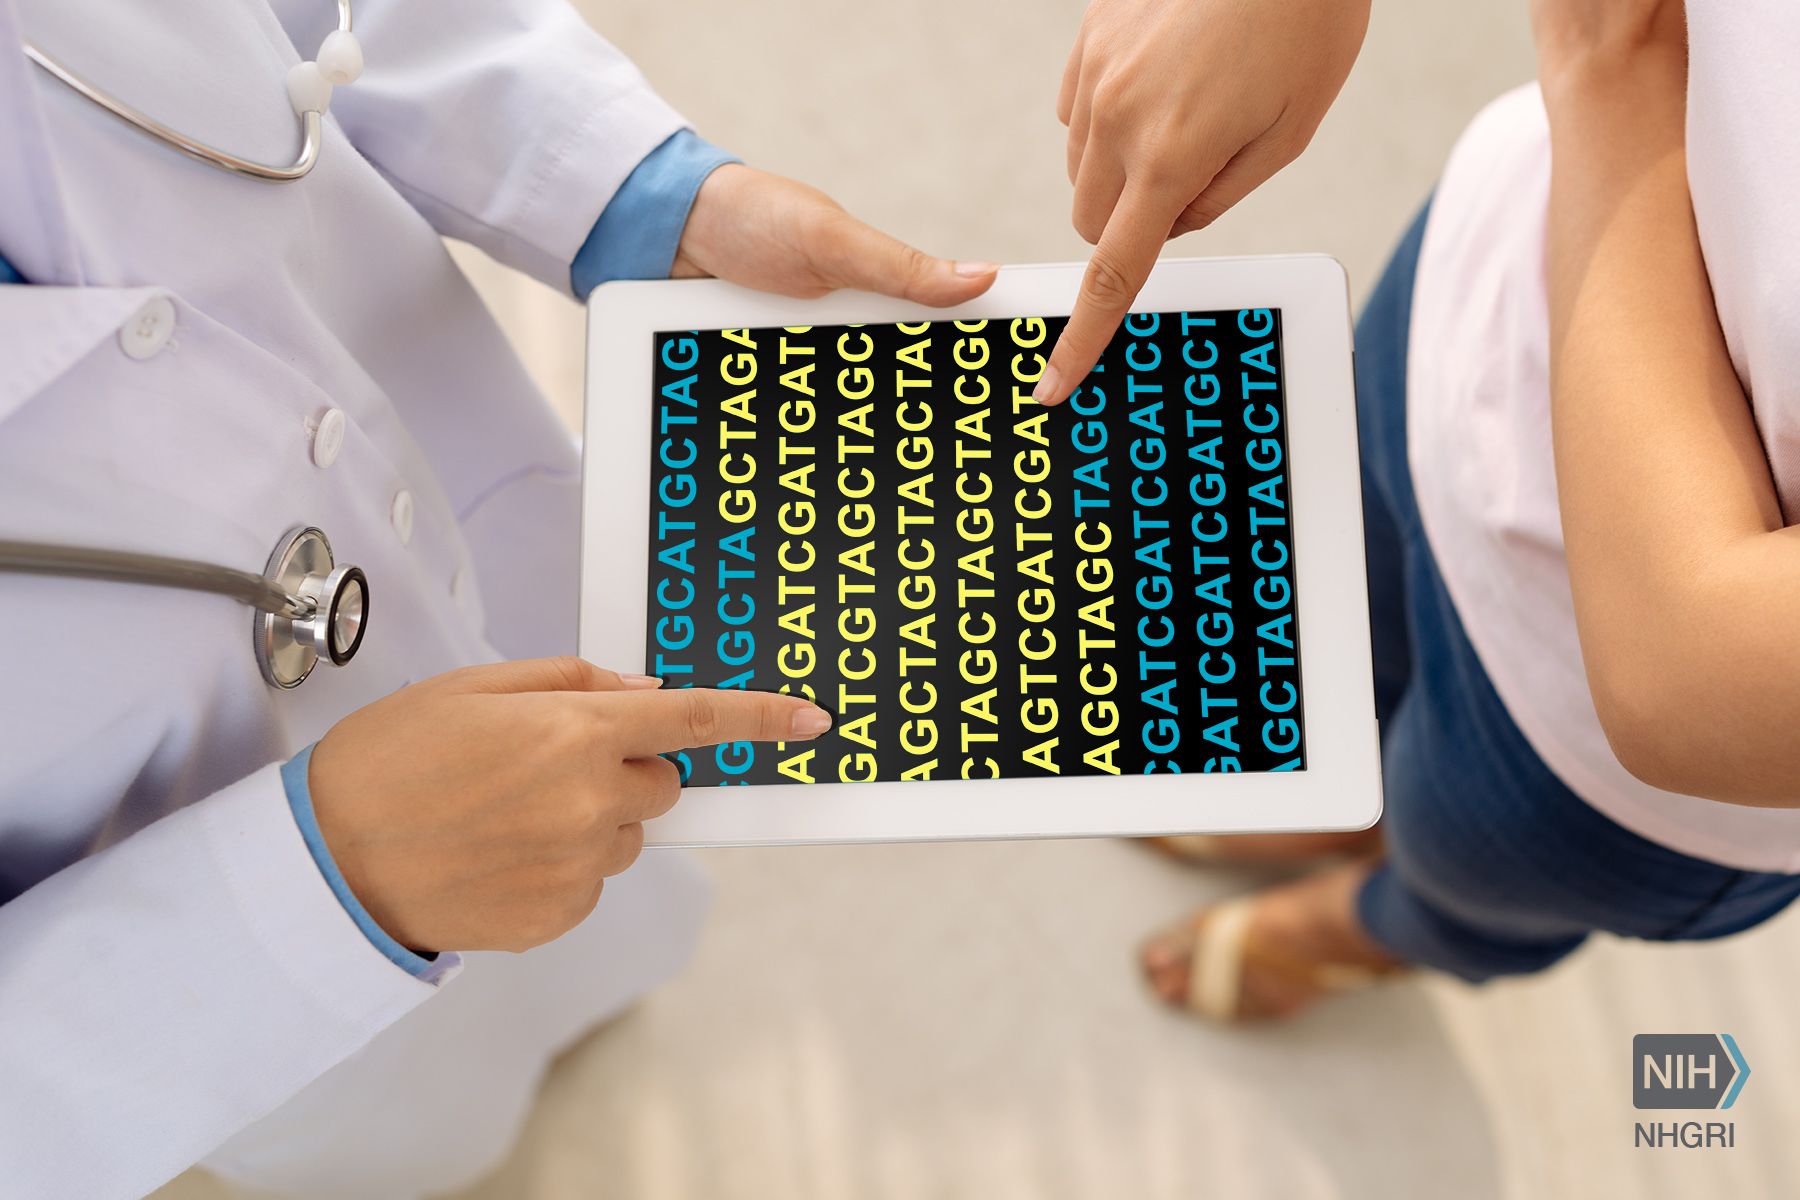 Health professional with a tablet showing genomic data.